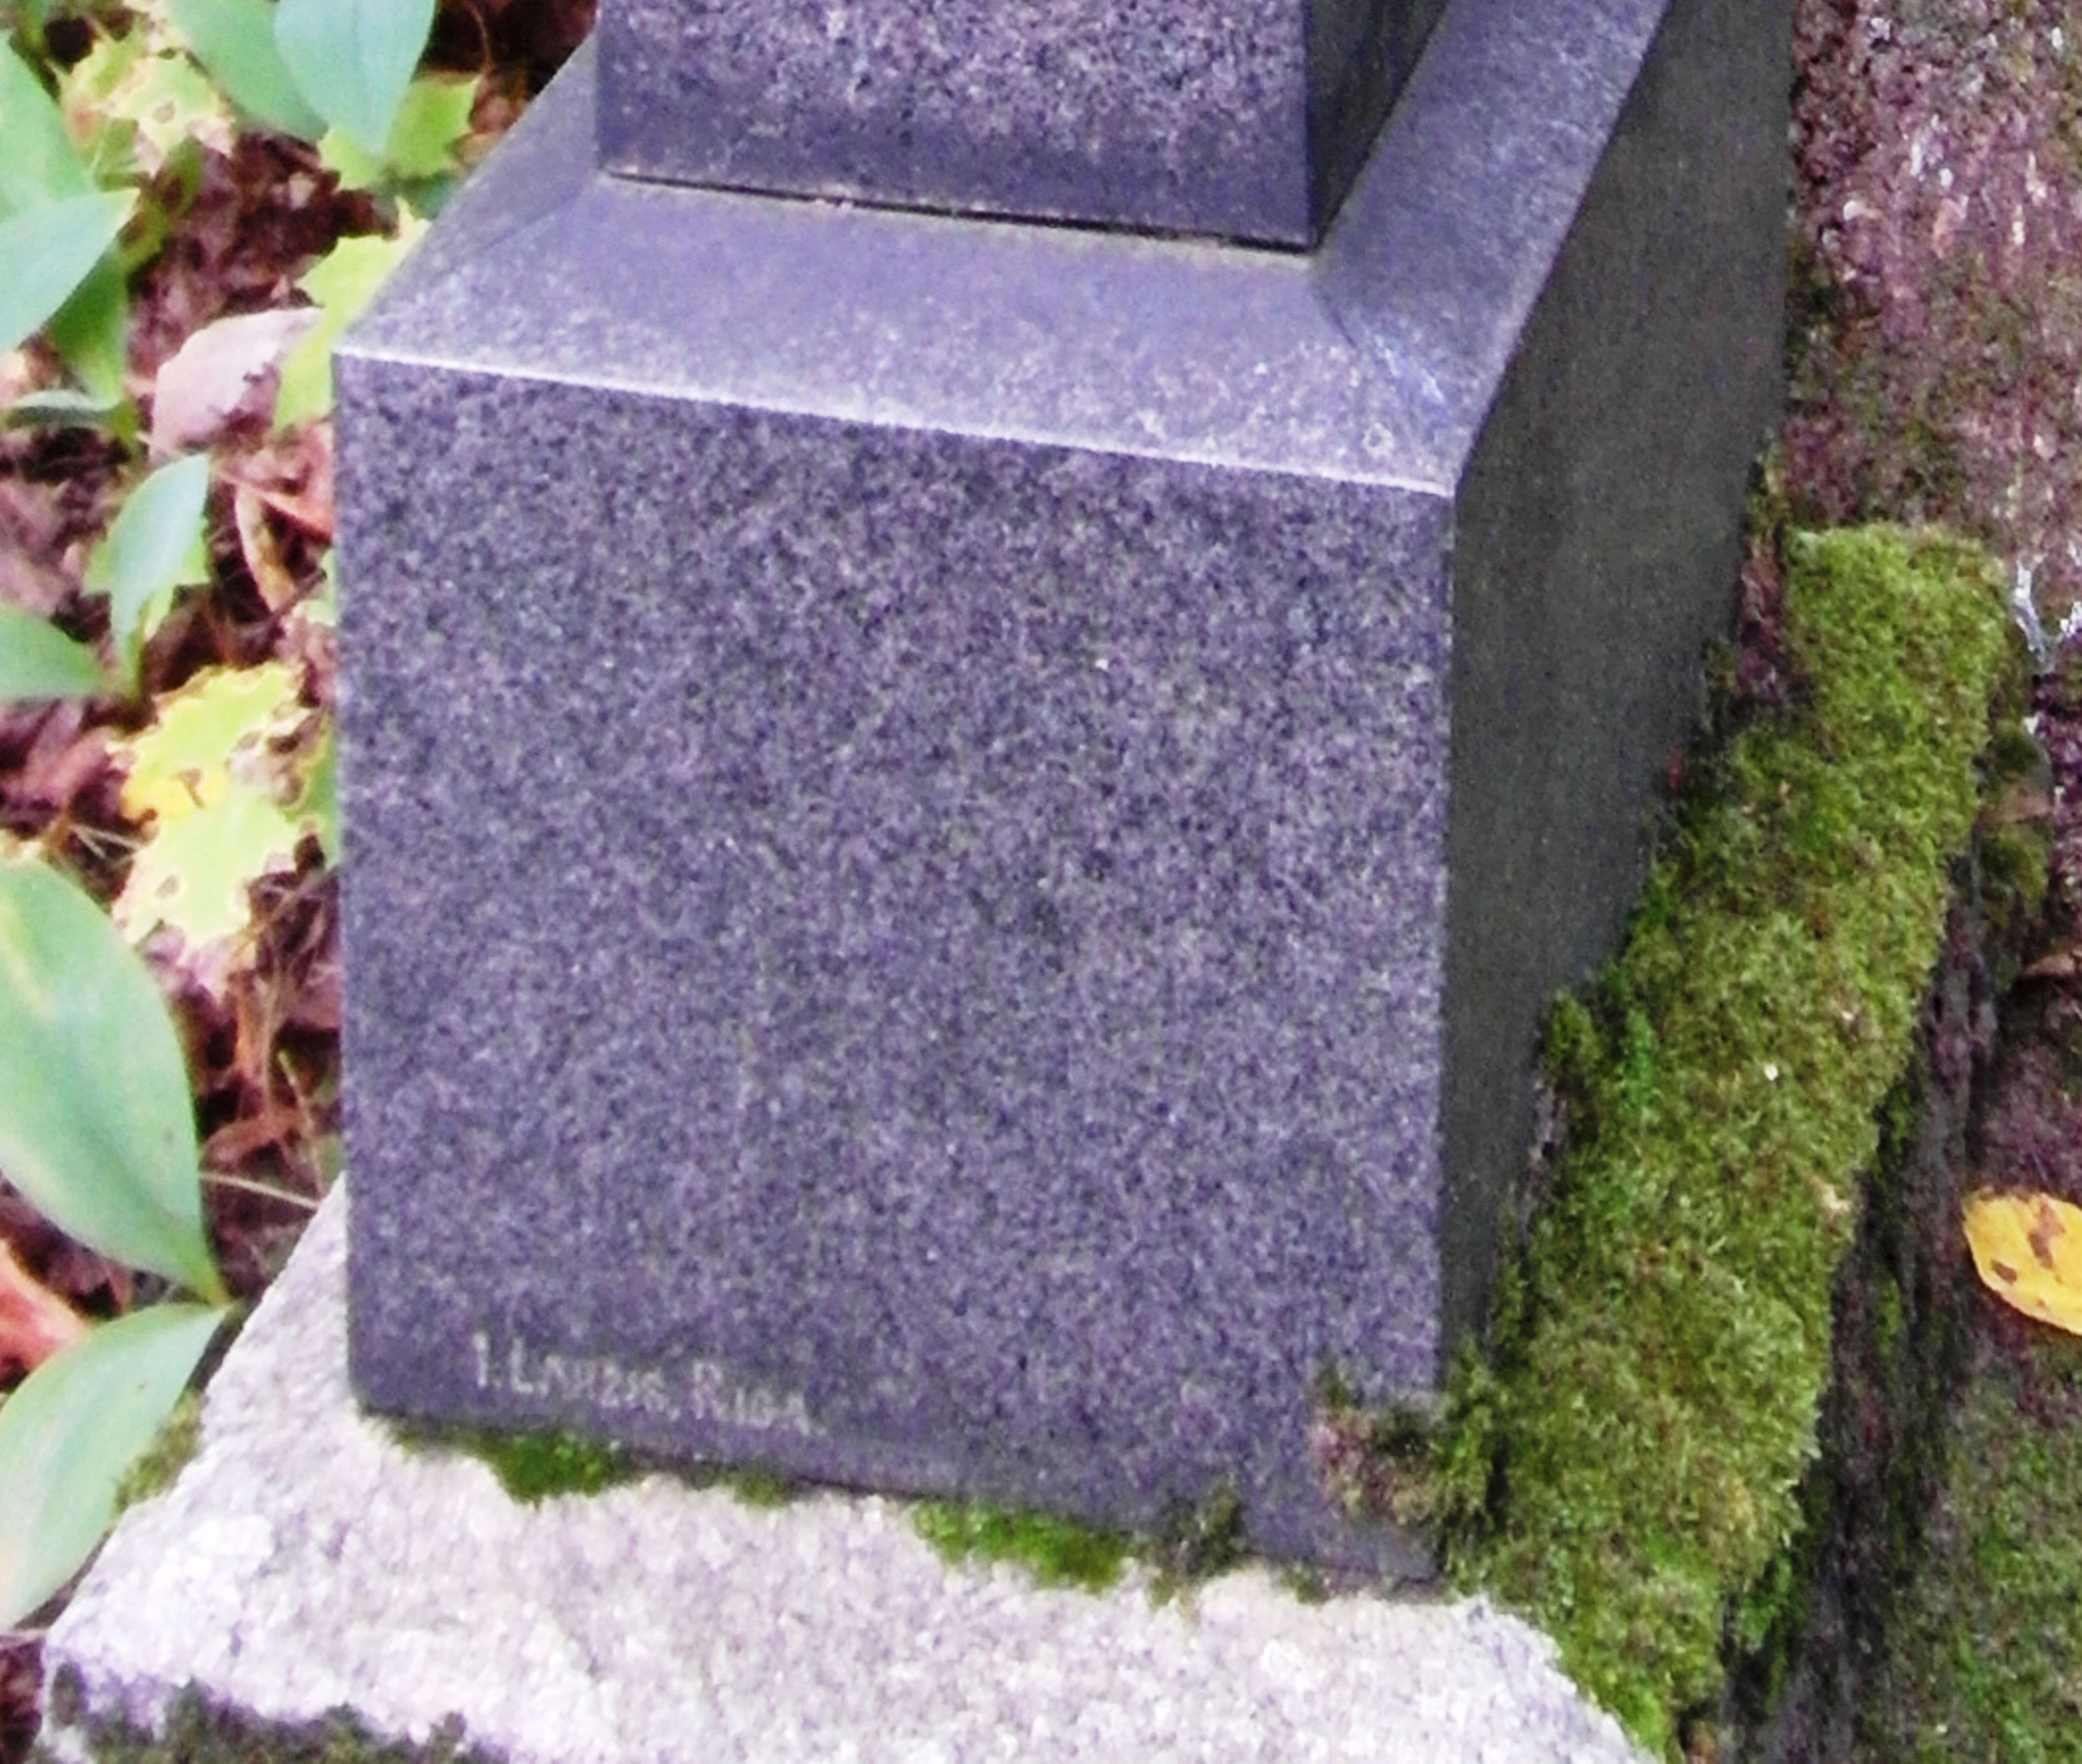 Fragment of the tombstone of Wanda Paszkiewicz, St Michael's cemetery in Riga, as of 2021.